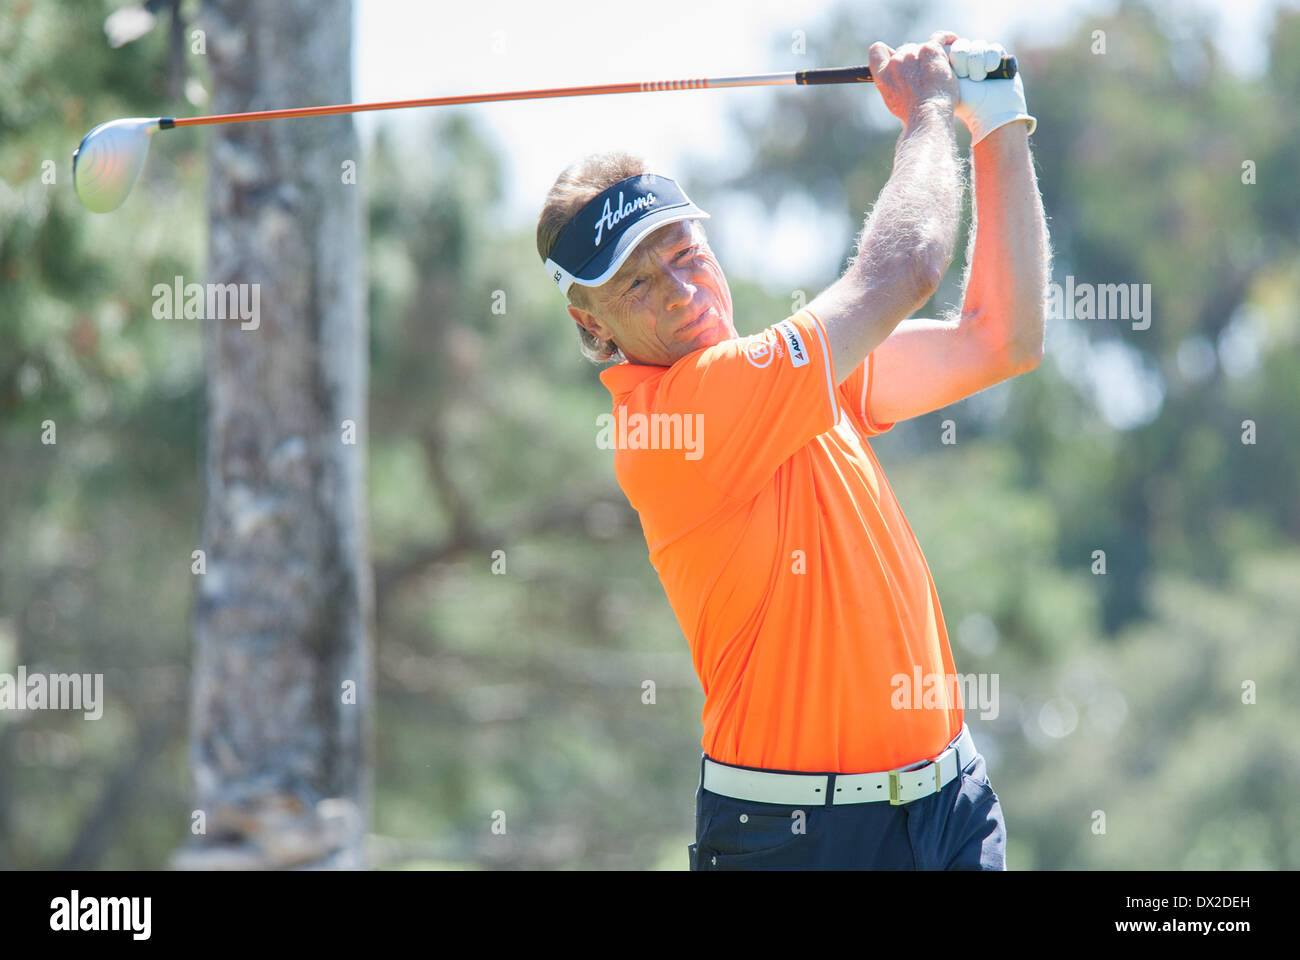 Newport Beach, California, USA. 16th Mar, 2014. Bernhard Langer watches his drive on the 2nd hole during the final round of the Toshiba Classic at the Newport Beach Country Club on March 16, 2014 in Newport Beach, California. © Doug Gifford/ZUMAPRESS.com/Alamy Live News Stock Photo